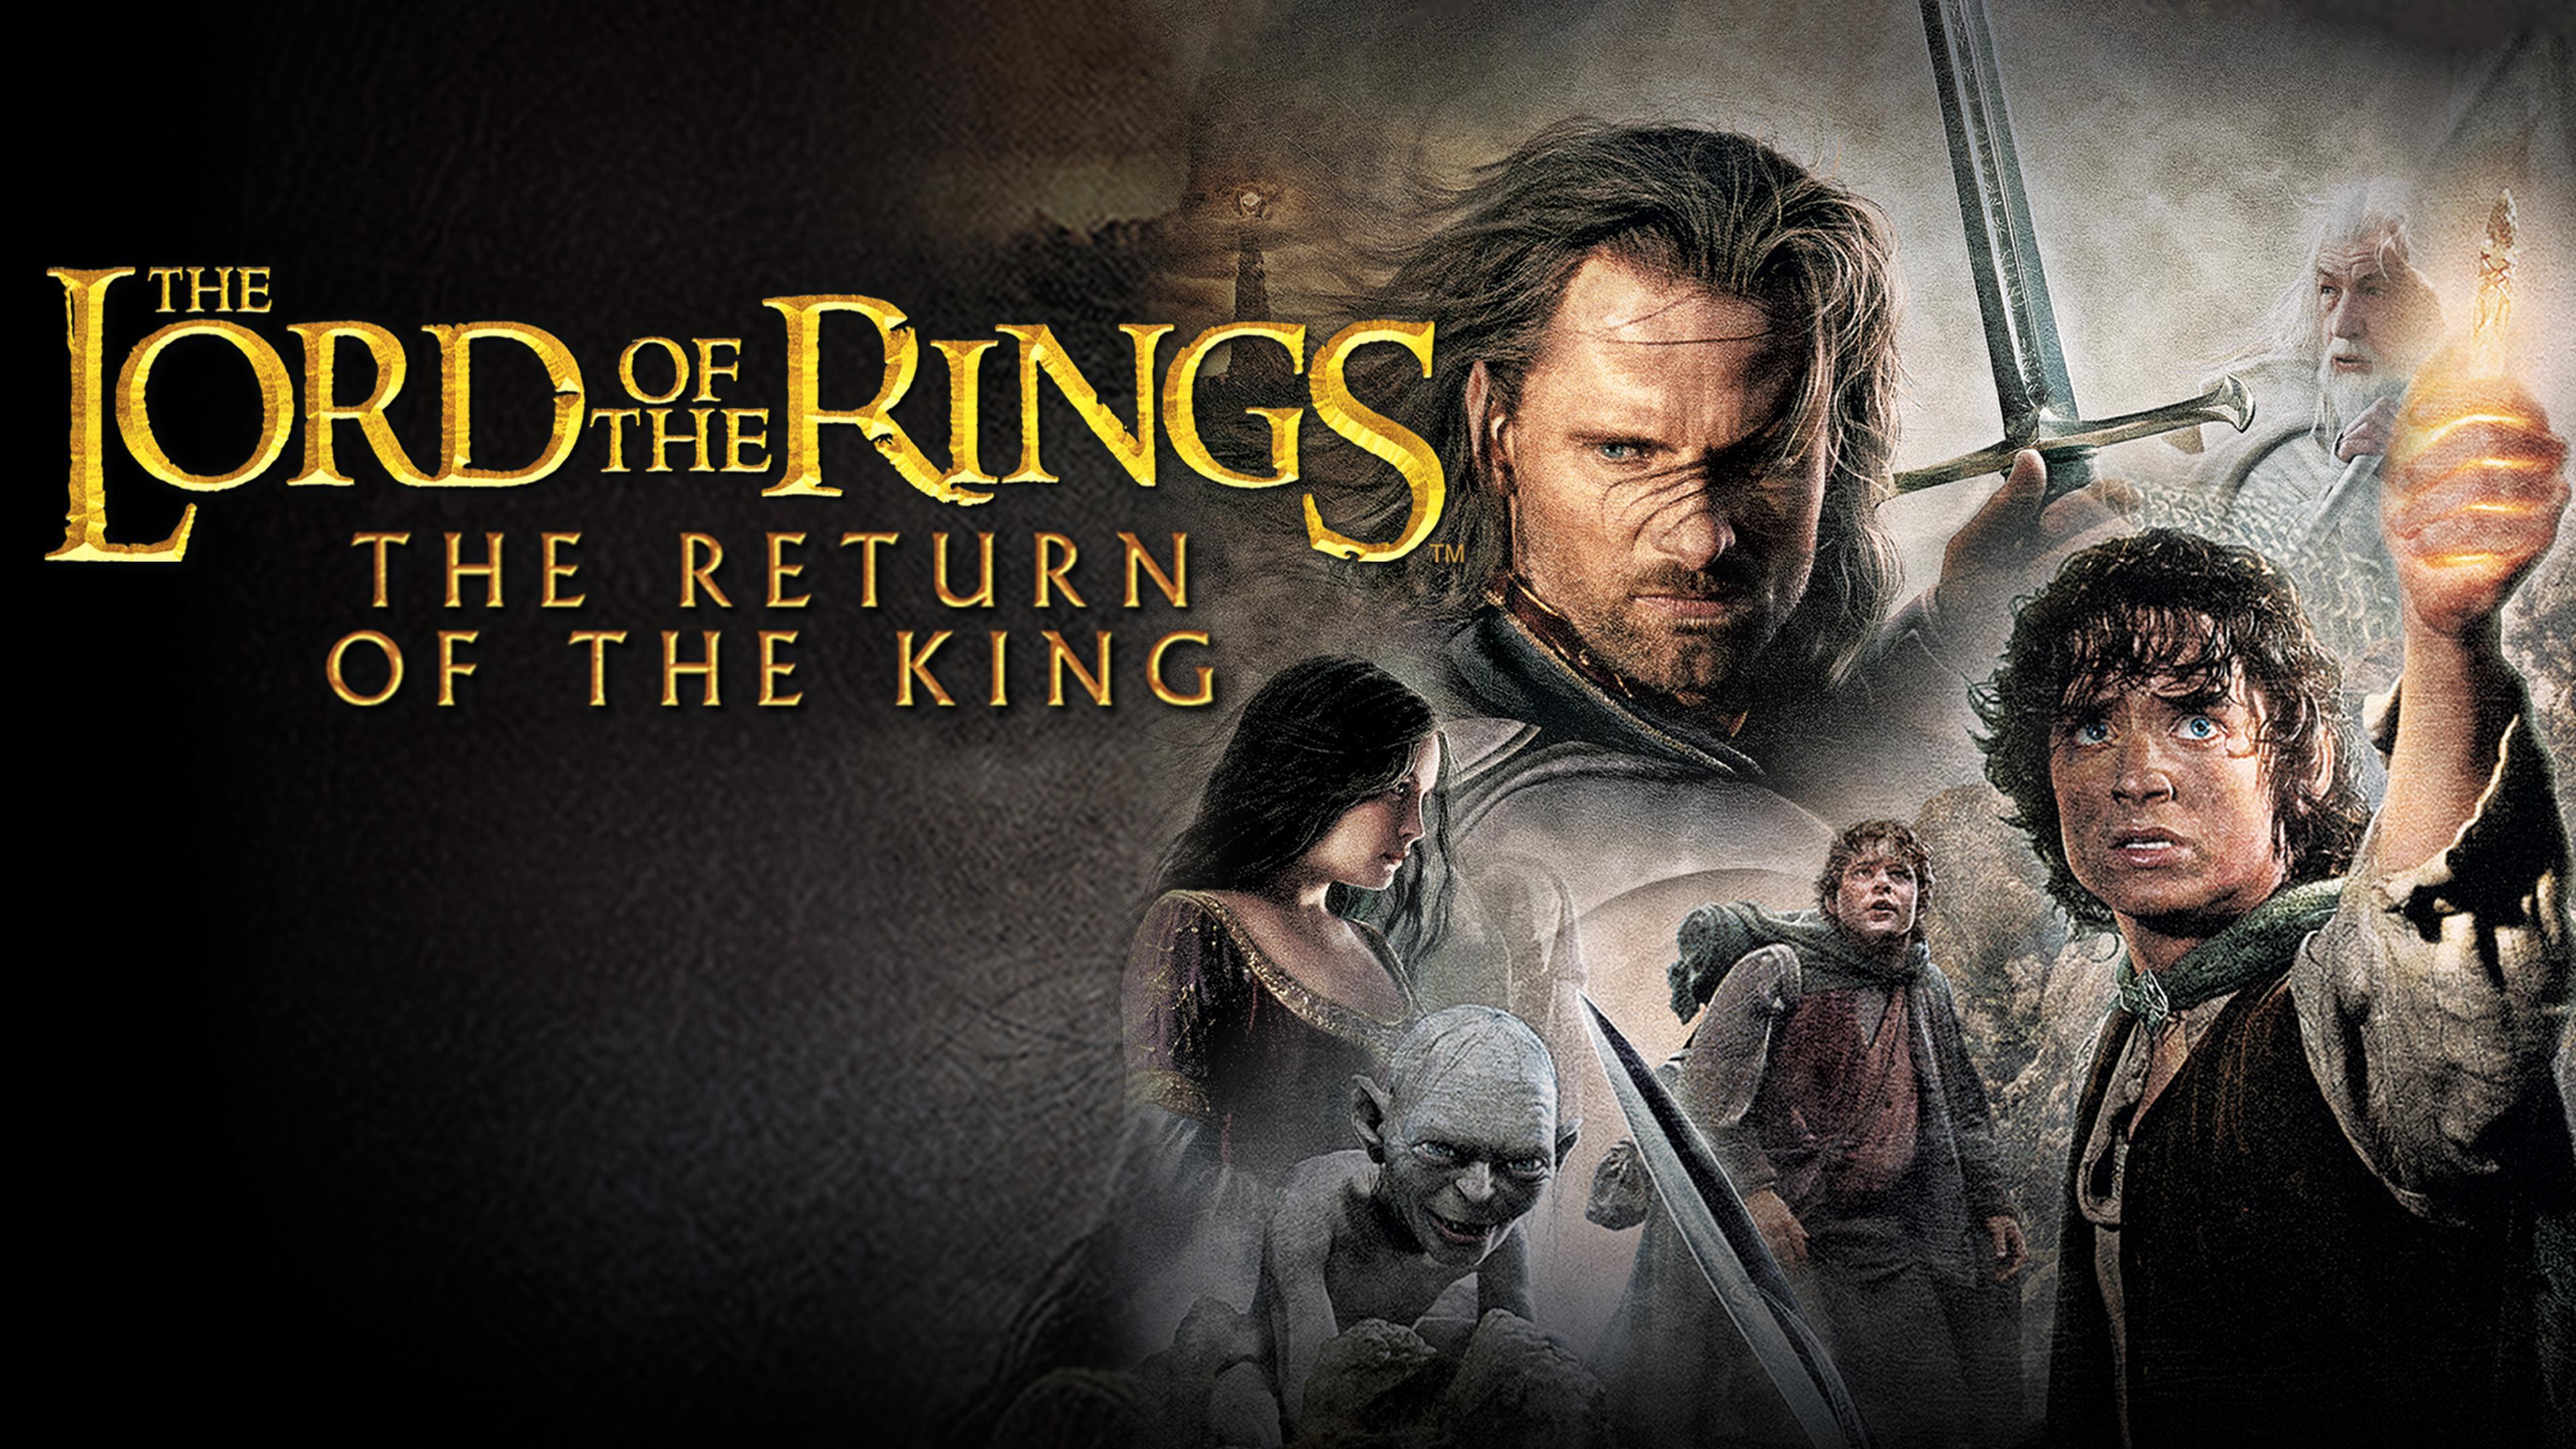 draadloze bioscoop huid Watch The Lord of the Rings: The Return of the King | Max